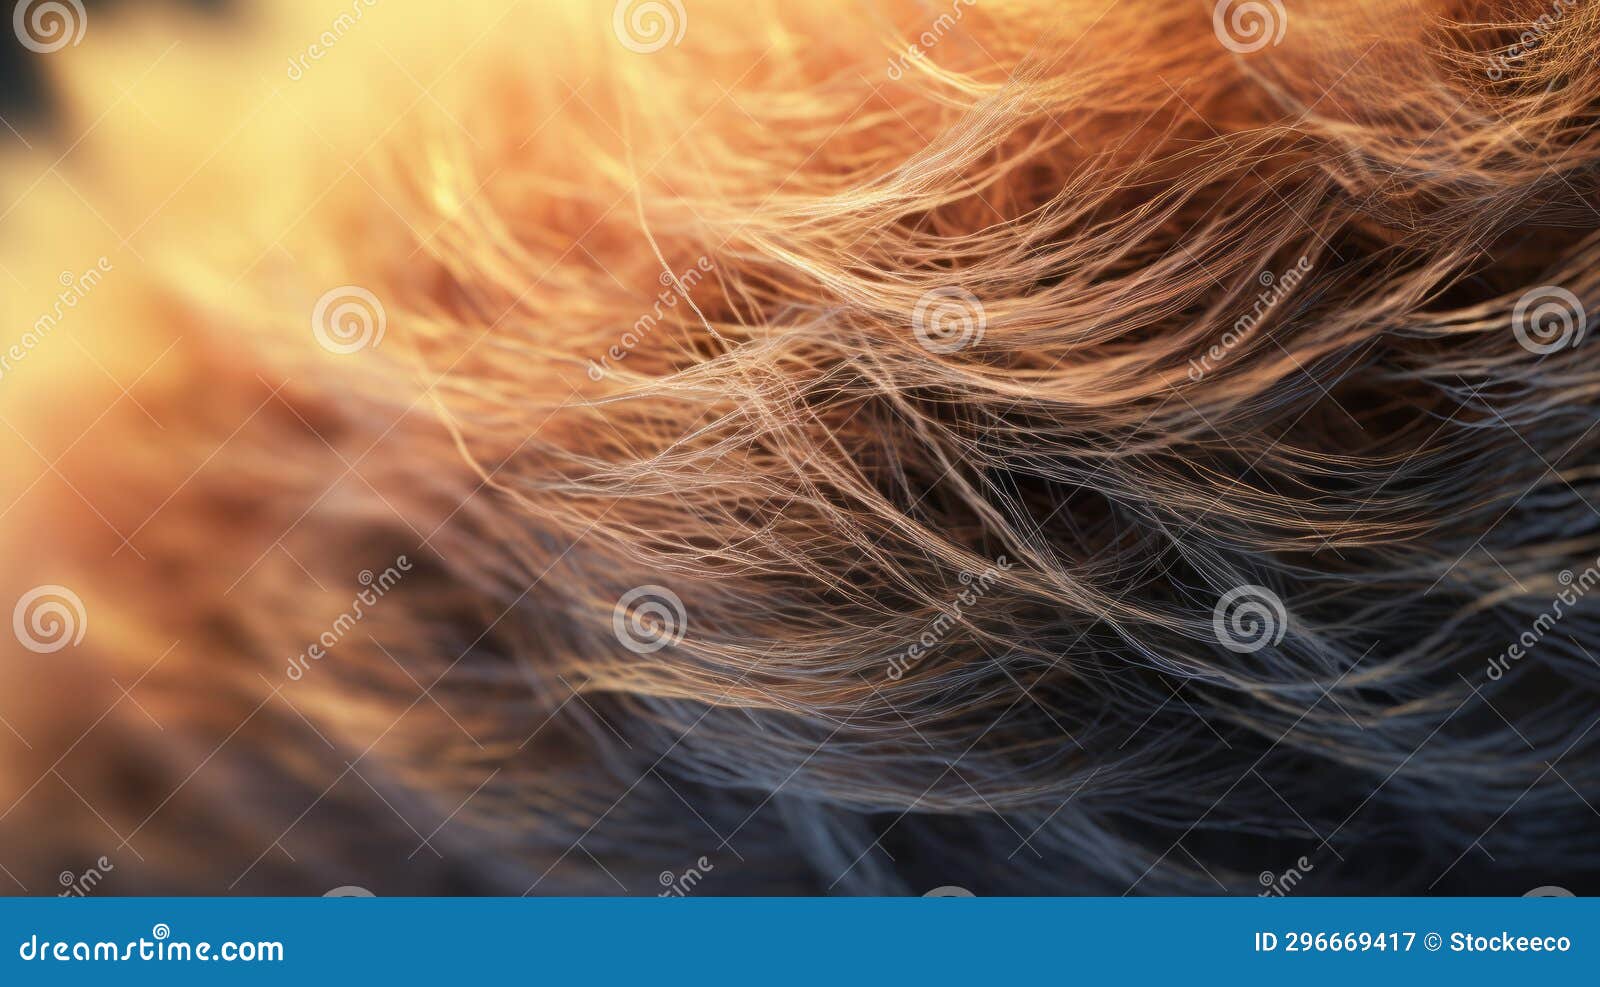 macro close-up of orange and brown hair with vray tracing